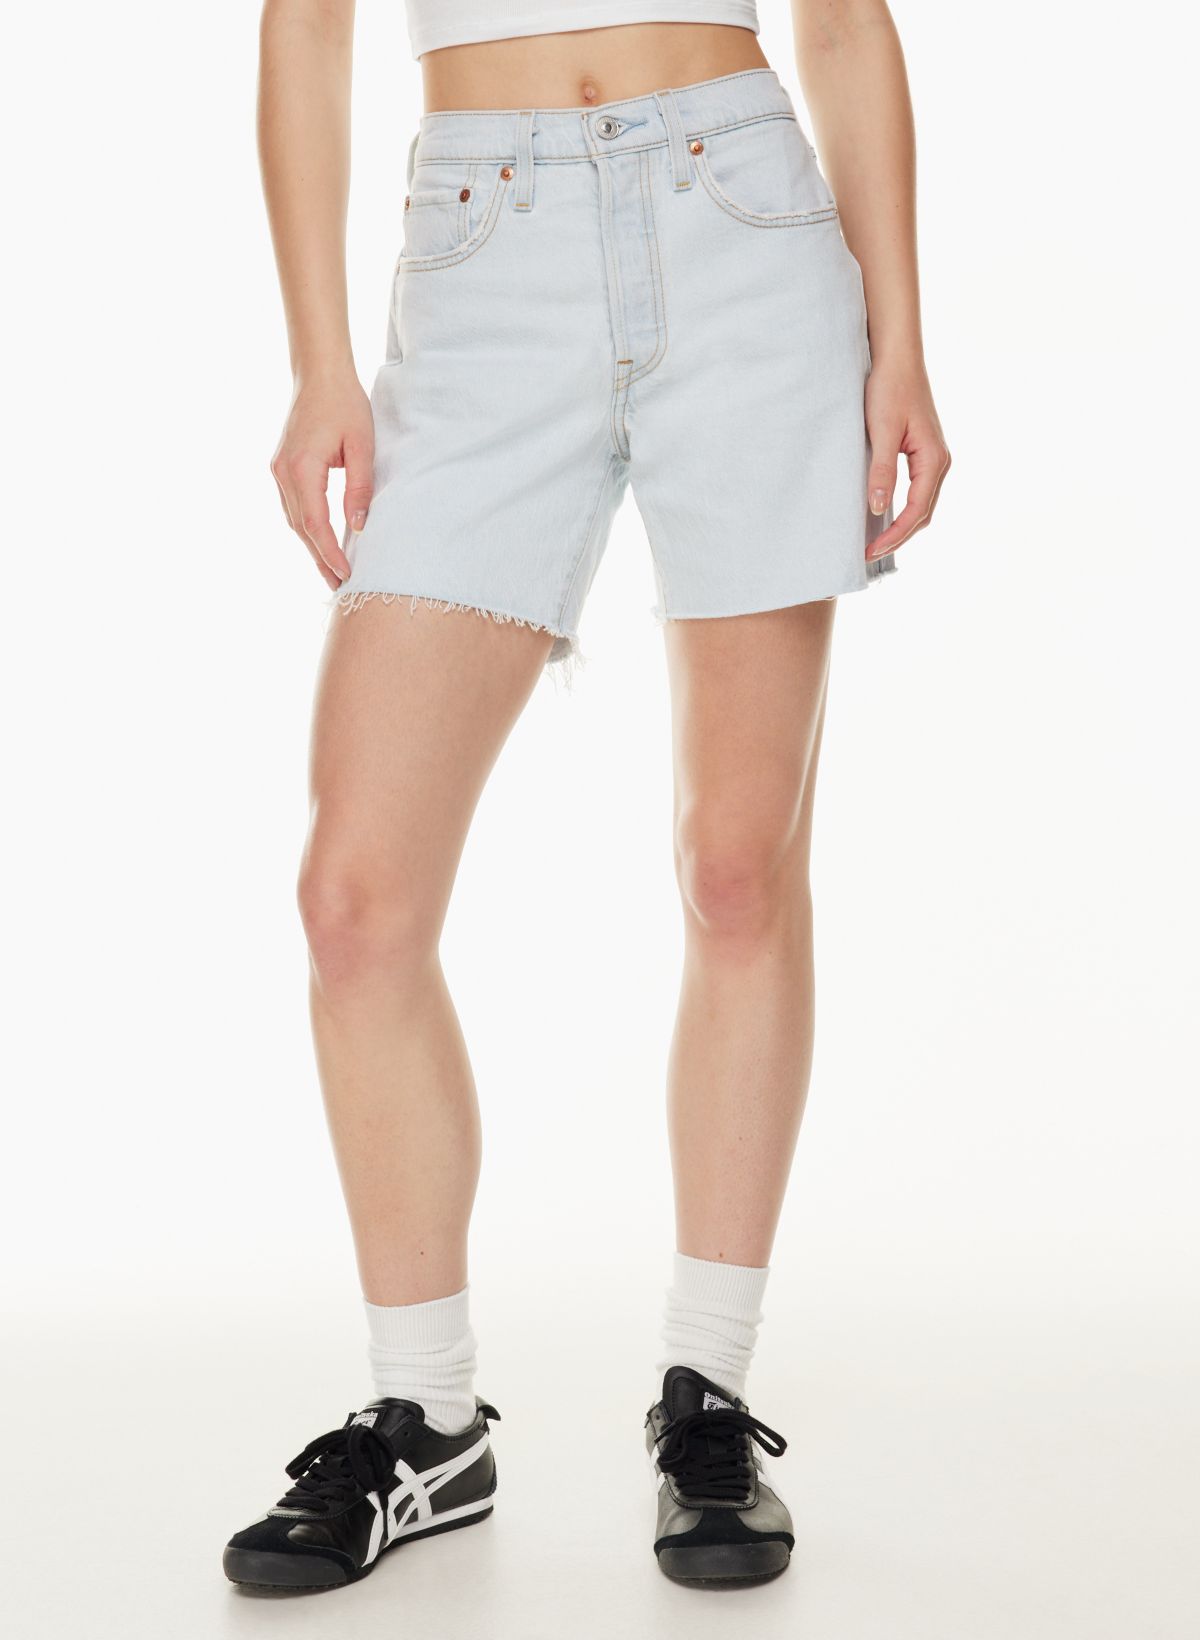 Mid thigh shorts • Compare & find best prices today »